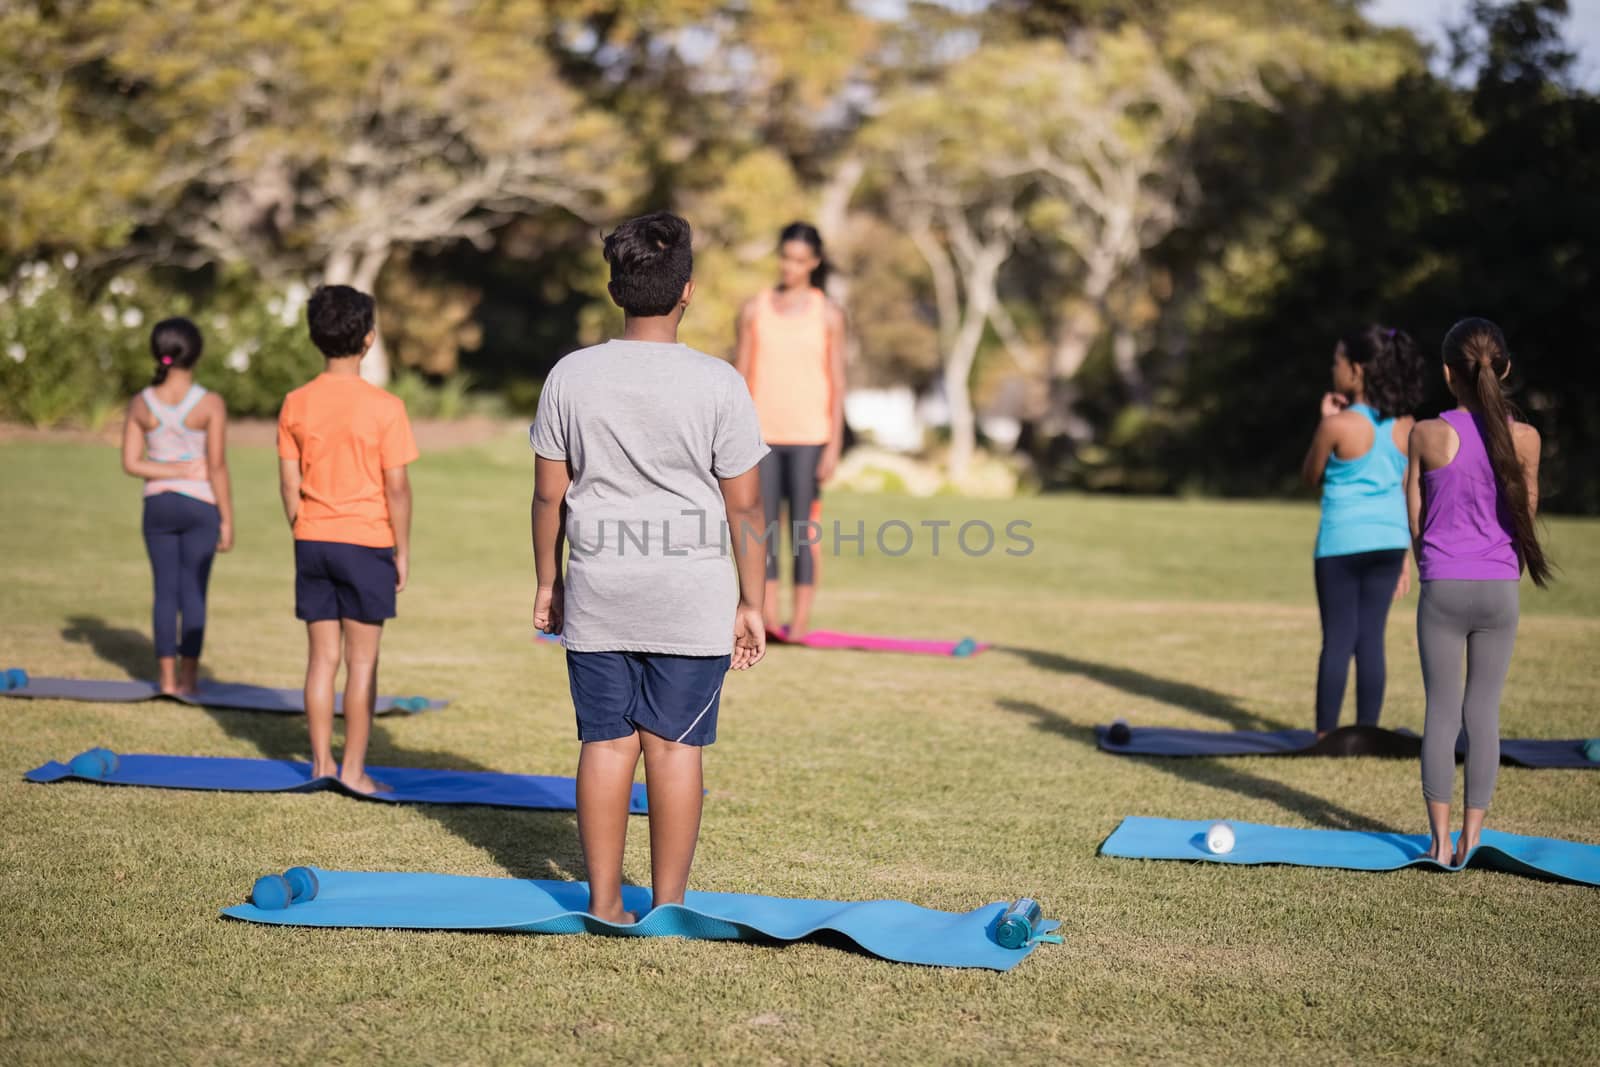 Children standing on exercise mat practicing yoga at park during summer camp